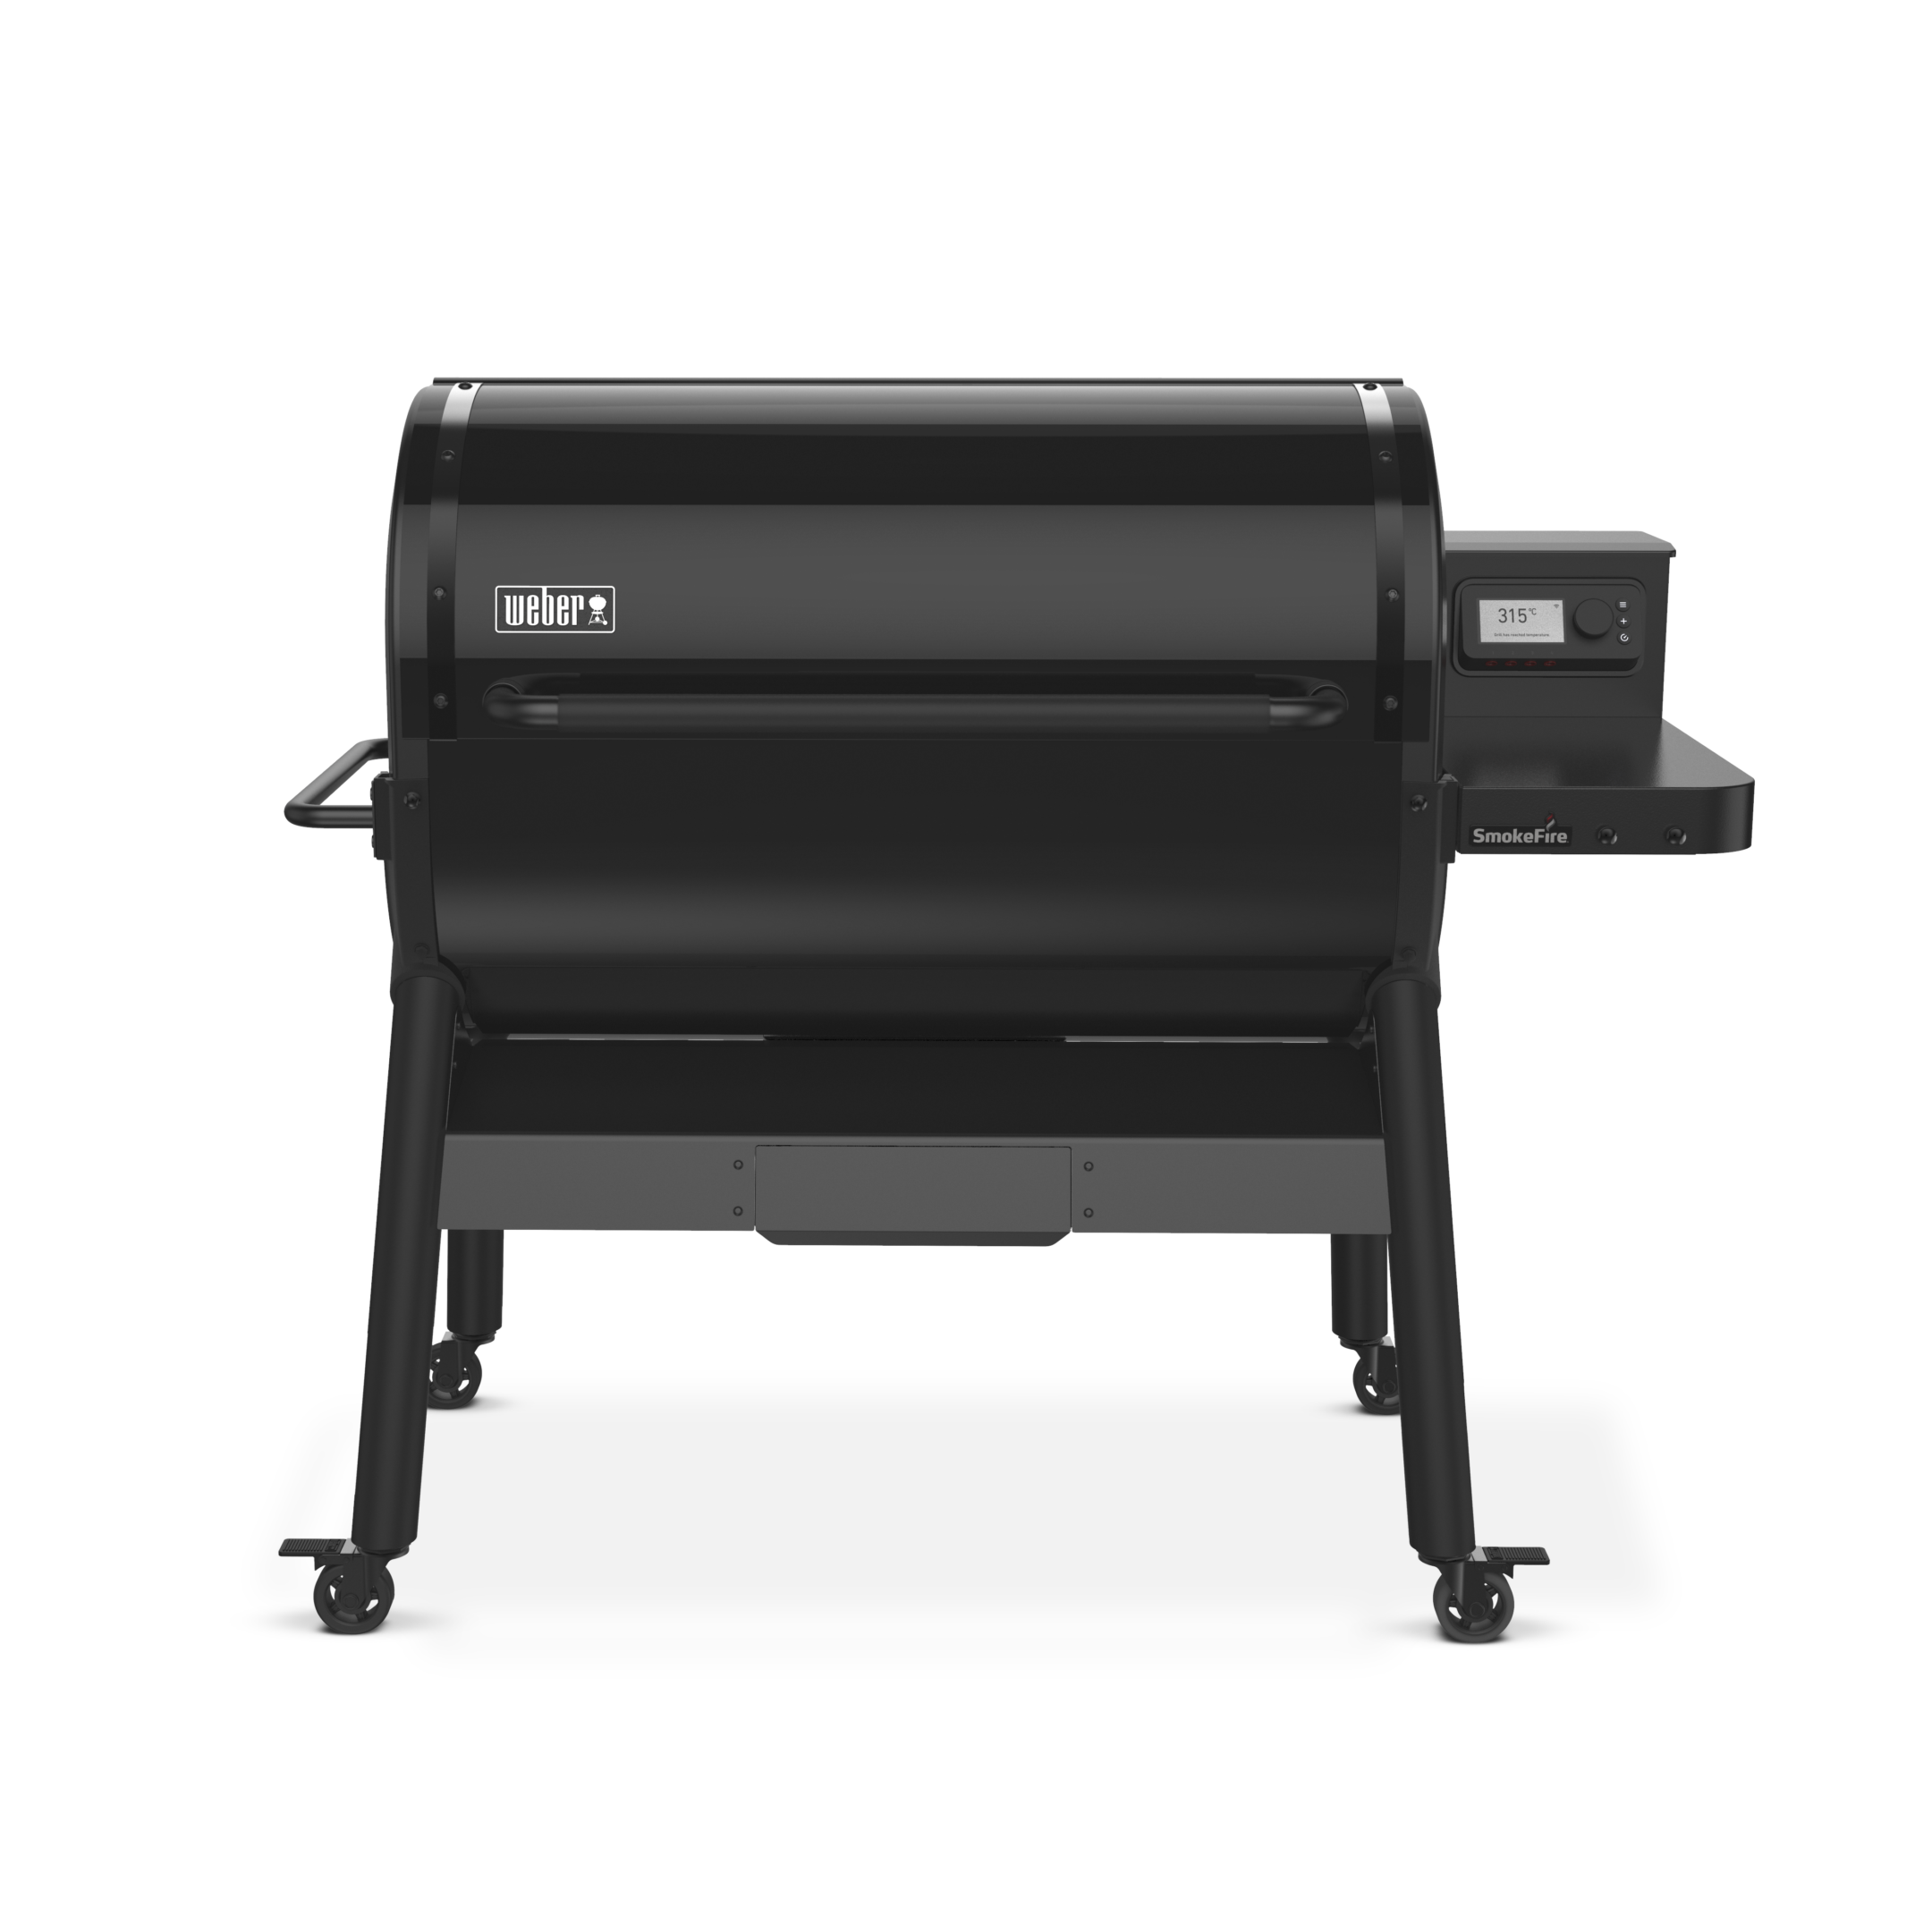 The SmokeFire EPX6 wood pellet grill Stealth Edition (Bild: weber.com)